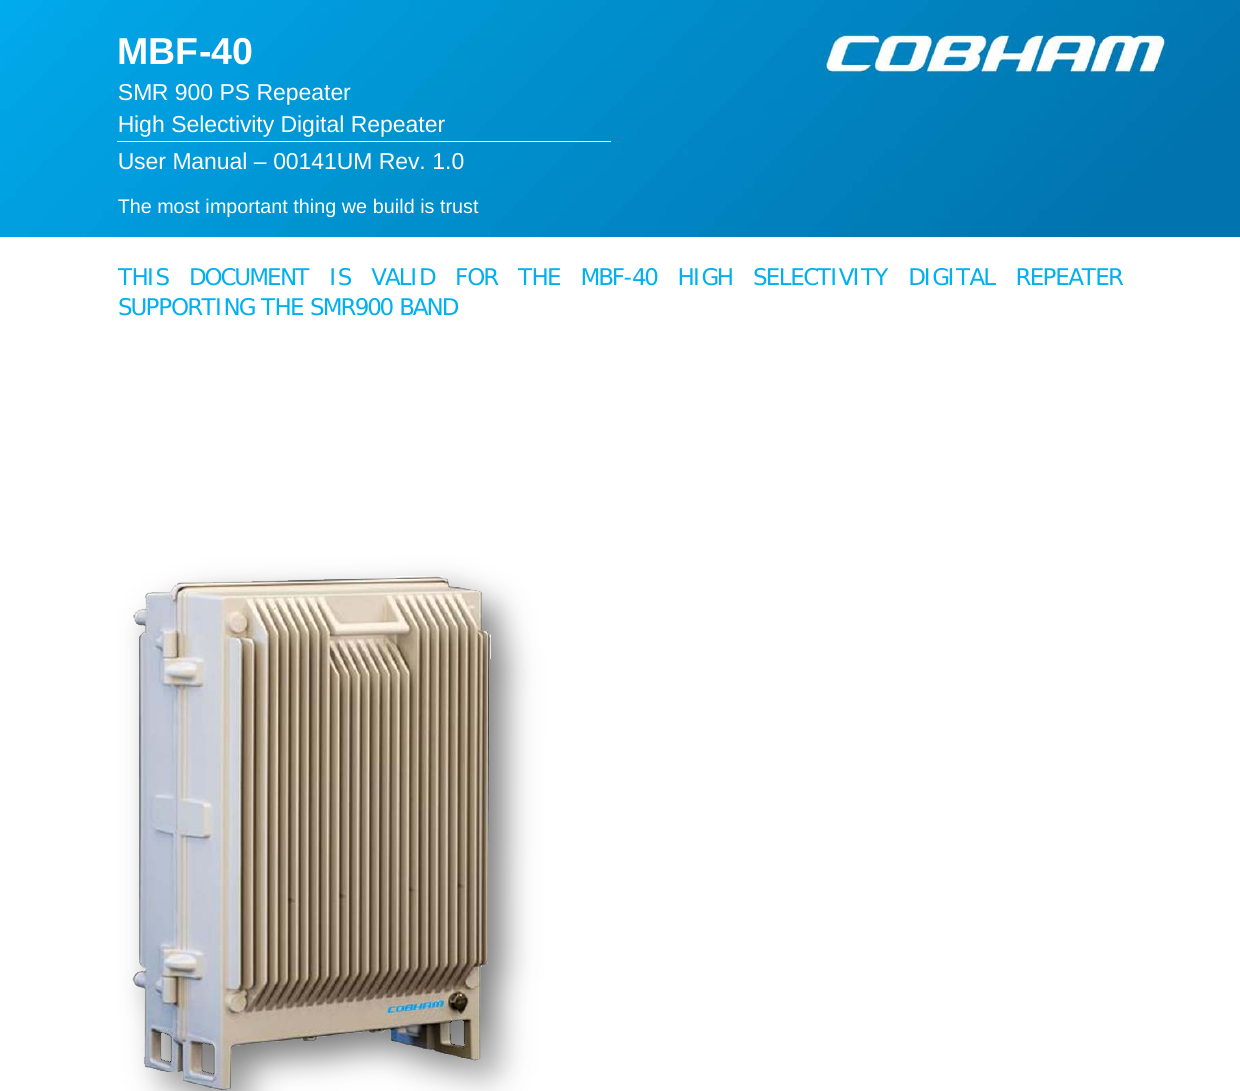   The most important thing we build is trust  MBF-40  SMR 900 PS Repeater High Selectivity Digital Repeater  User Manual – 00141UM Rev. 1.0      THIS DOCUMENT IS VALID FOR THE MBF-40 HIGH SELECTIVITY DIGITAL REPEATER SUPPORTING THE SMR900 BAND      